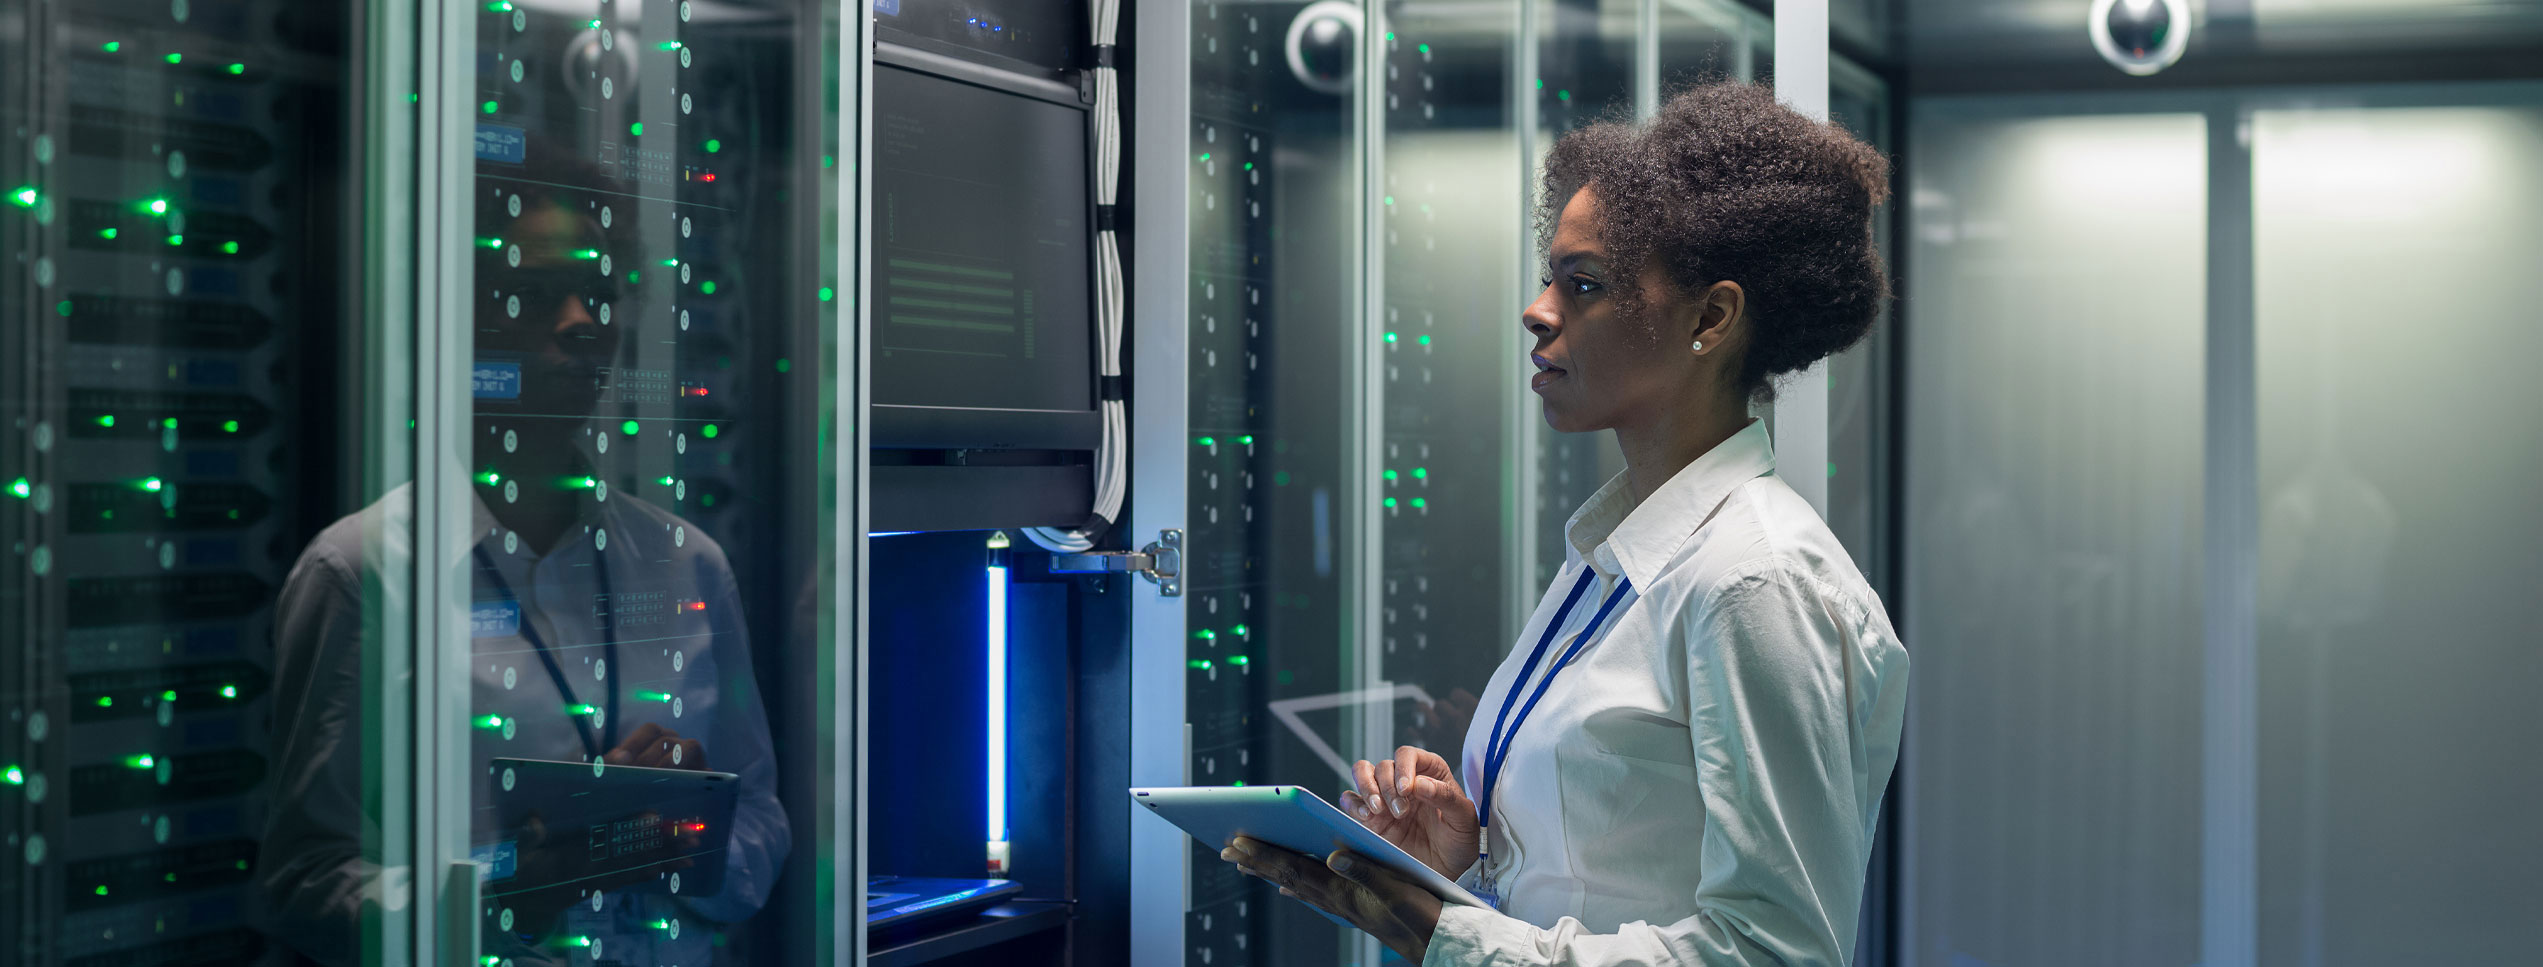 woman looking at new data center